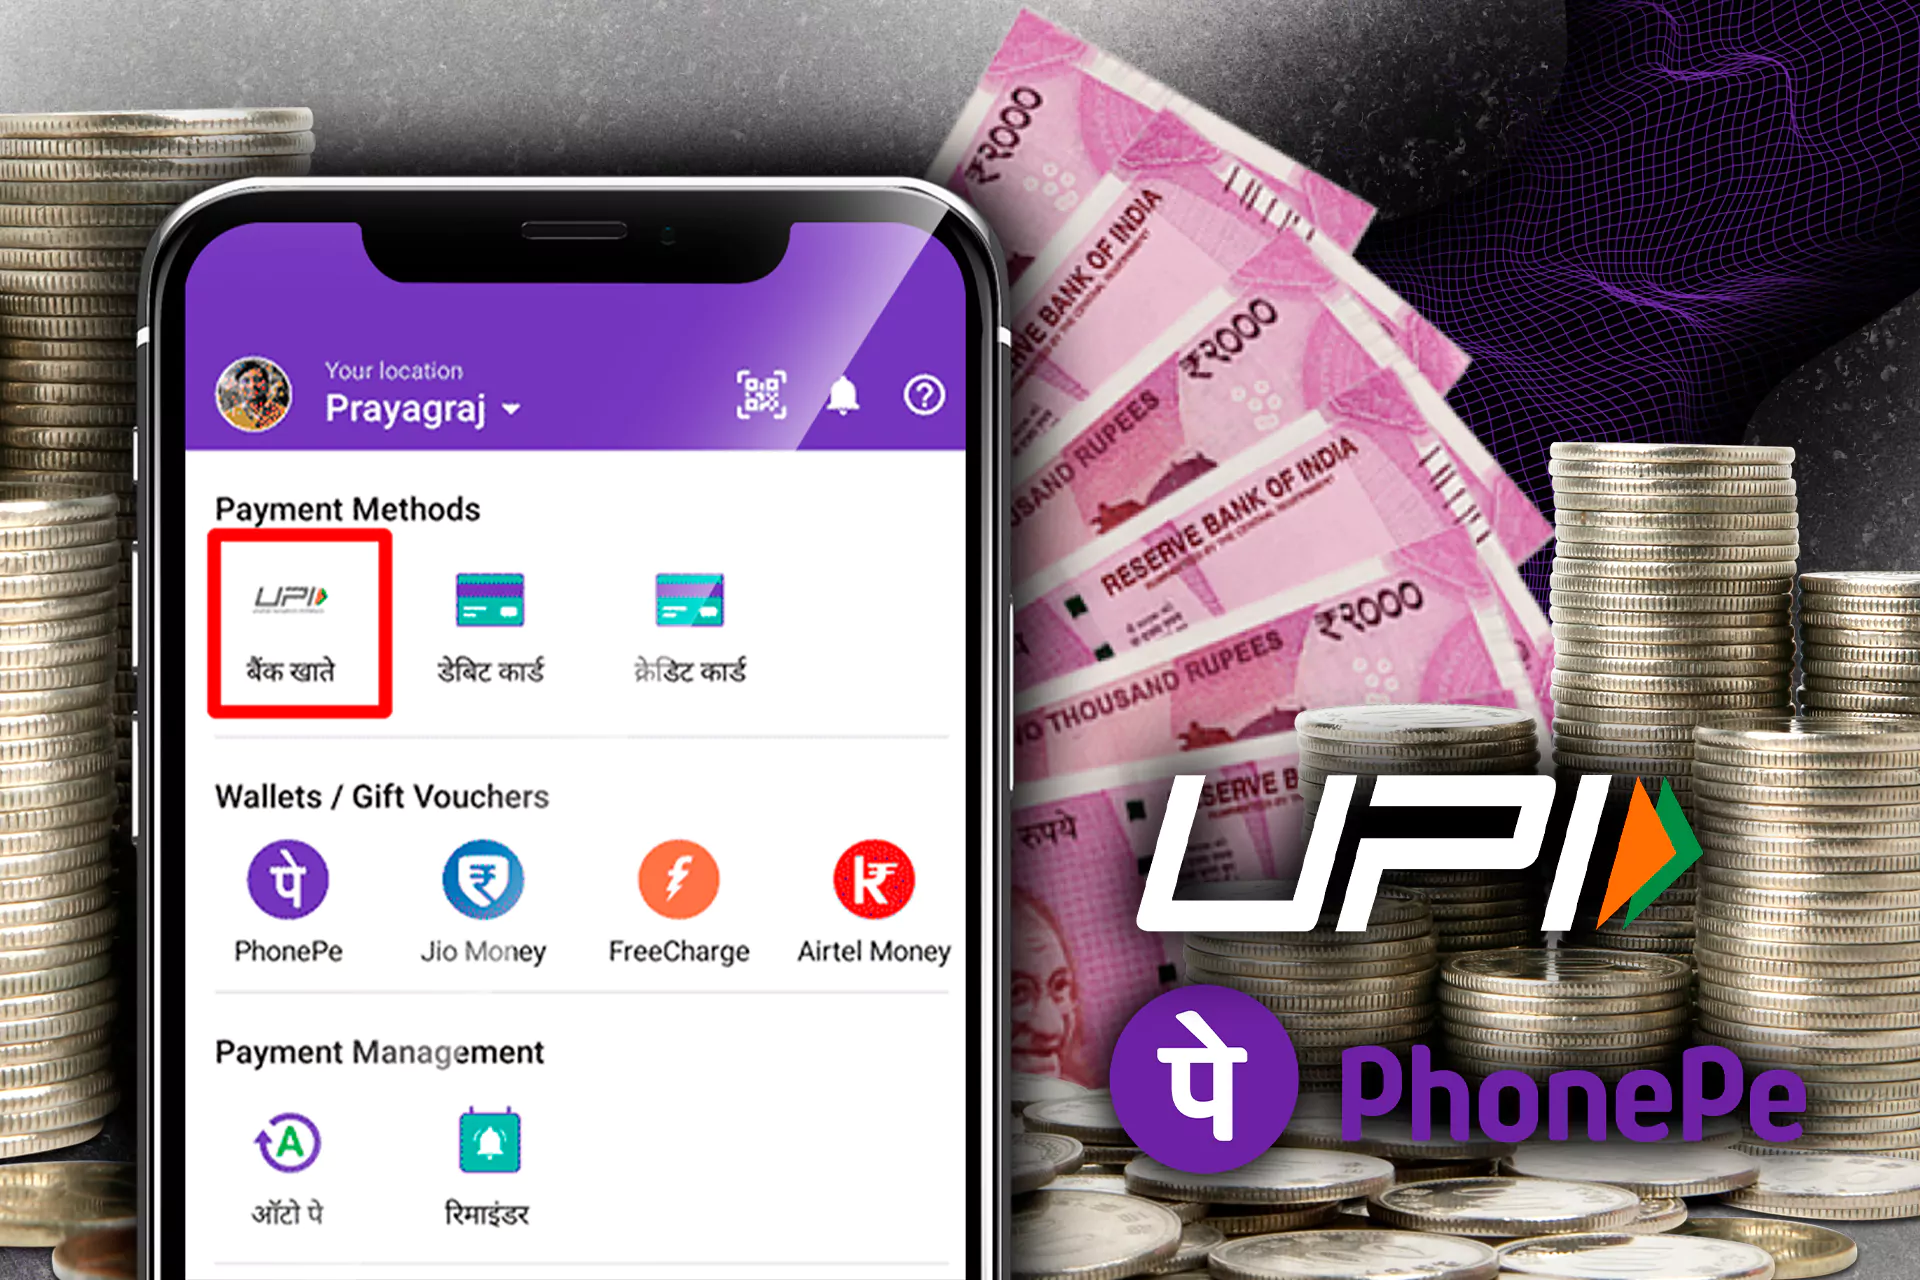 You can use UPI instead of PhonePe.